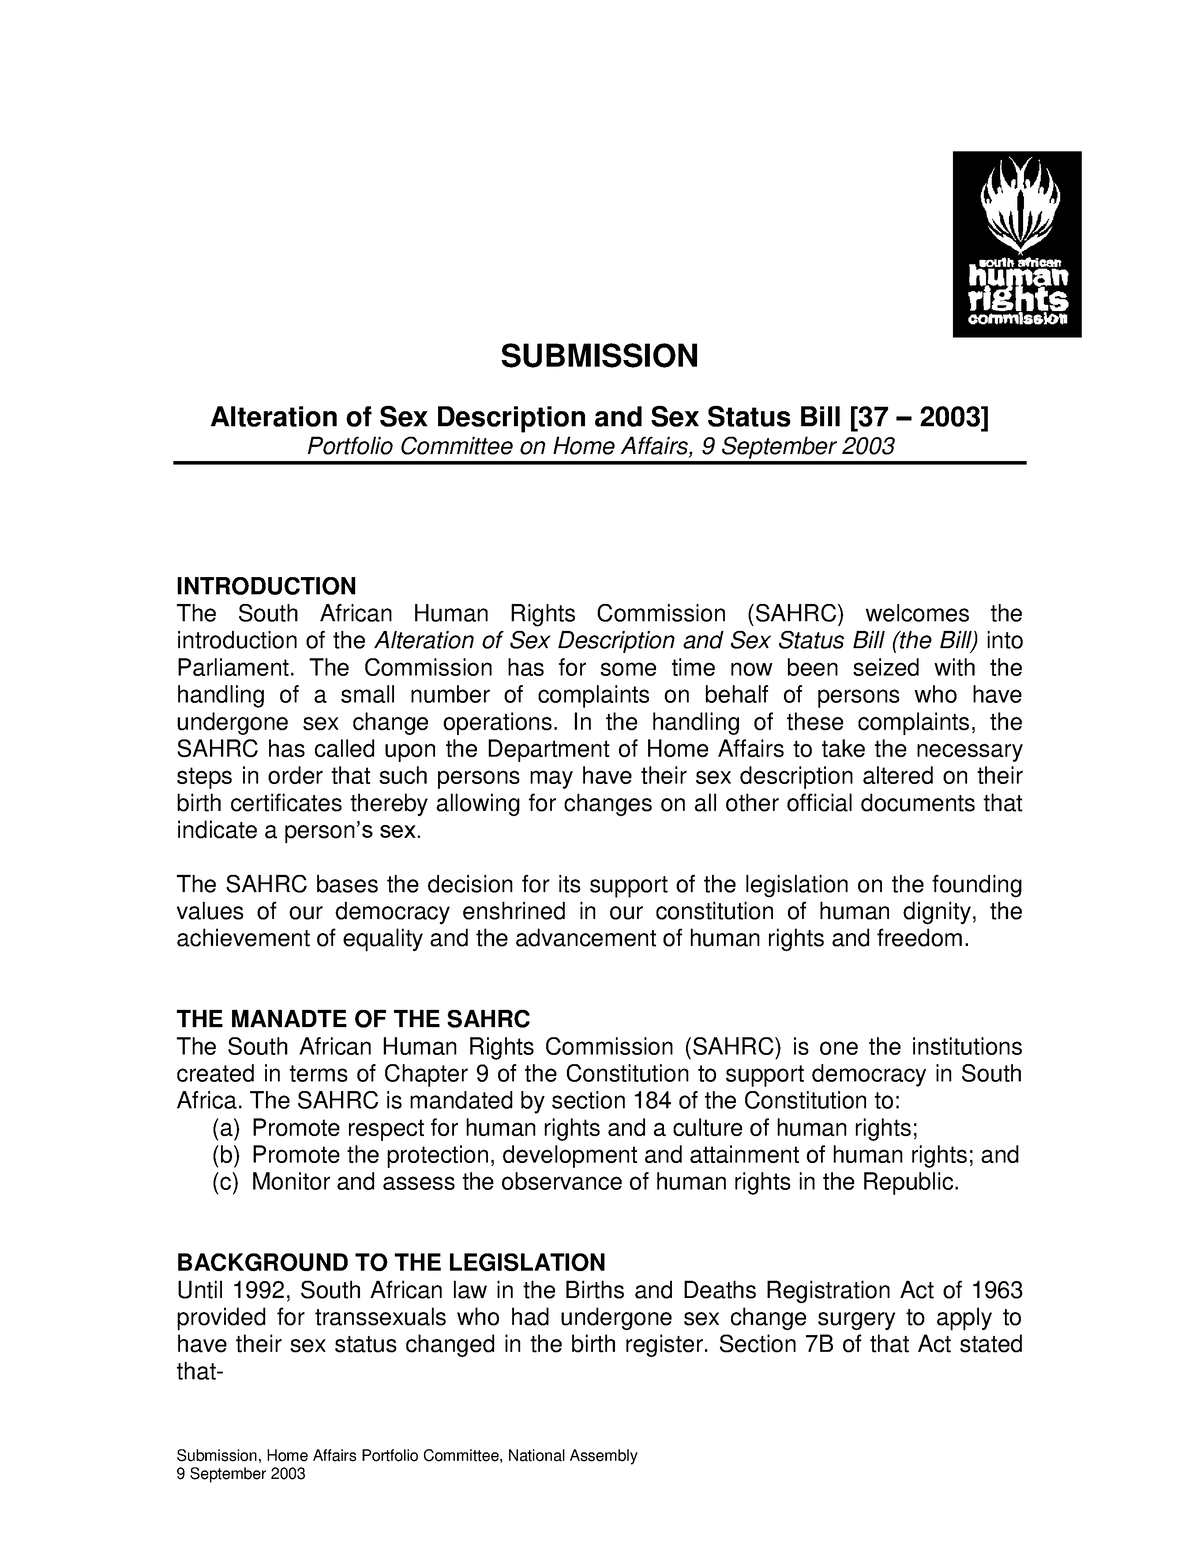 10 Sahrc Submission On Alteration Of Sex Description And Sex Status Bill Parlsept 2003 2119